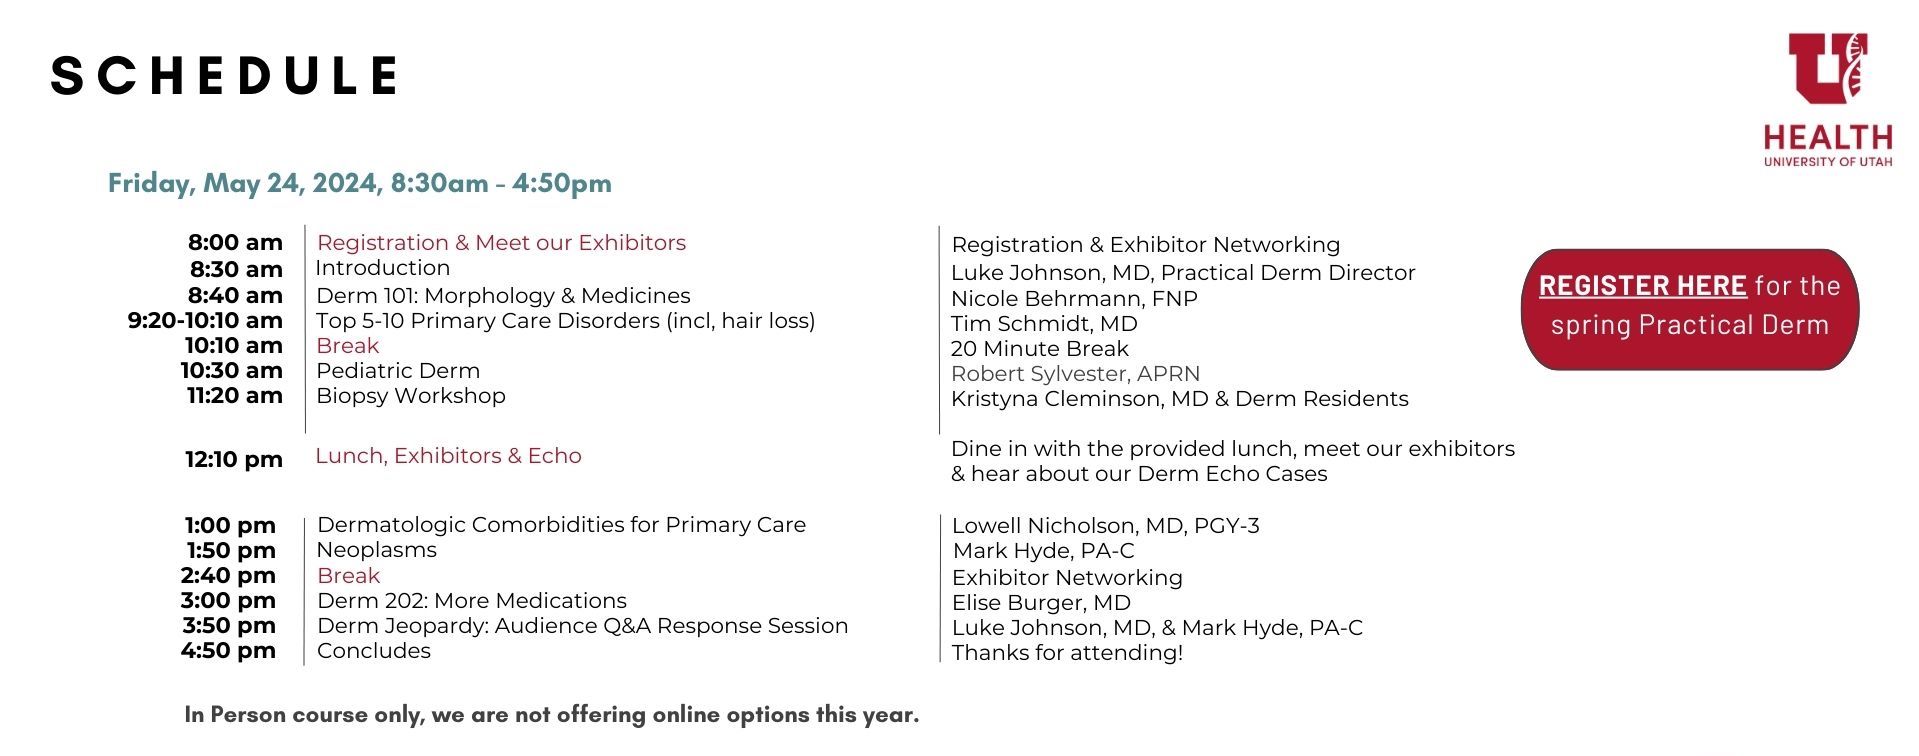 schedule for the upcoming practical derm conference